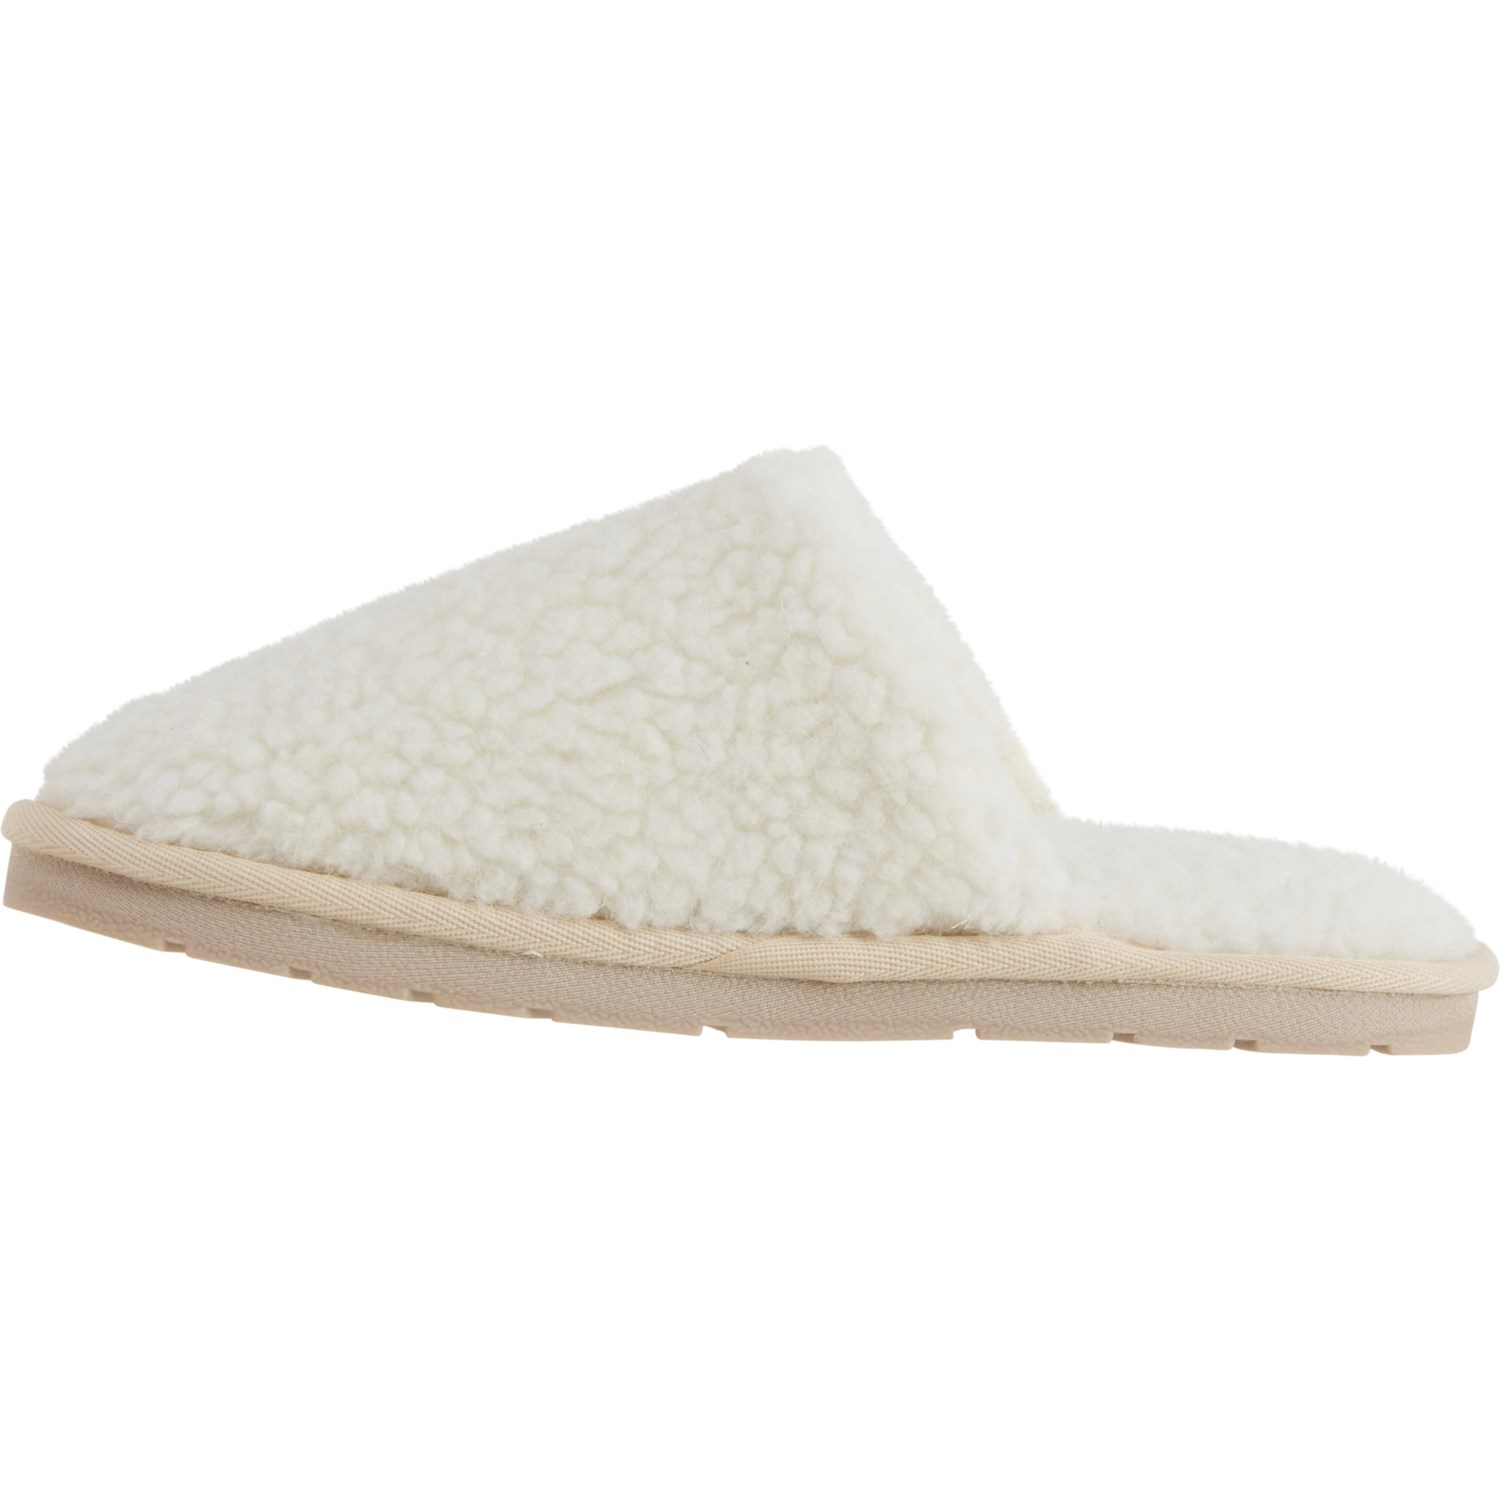 RJ FUZZIES Curly Wool Scuff Slippers (For Women) - Save 62%